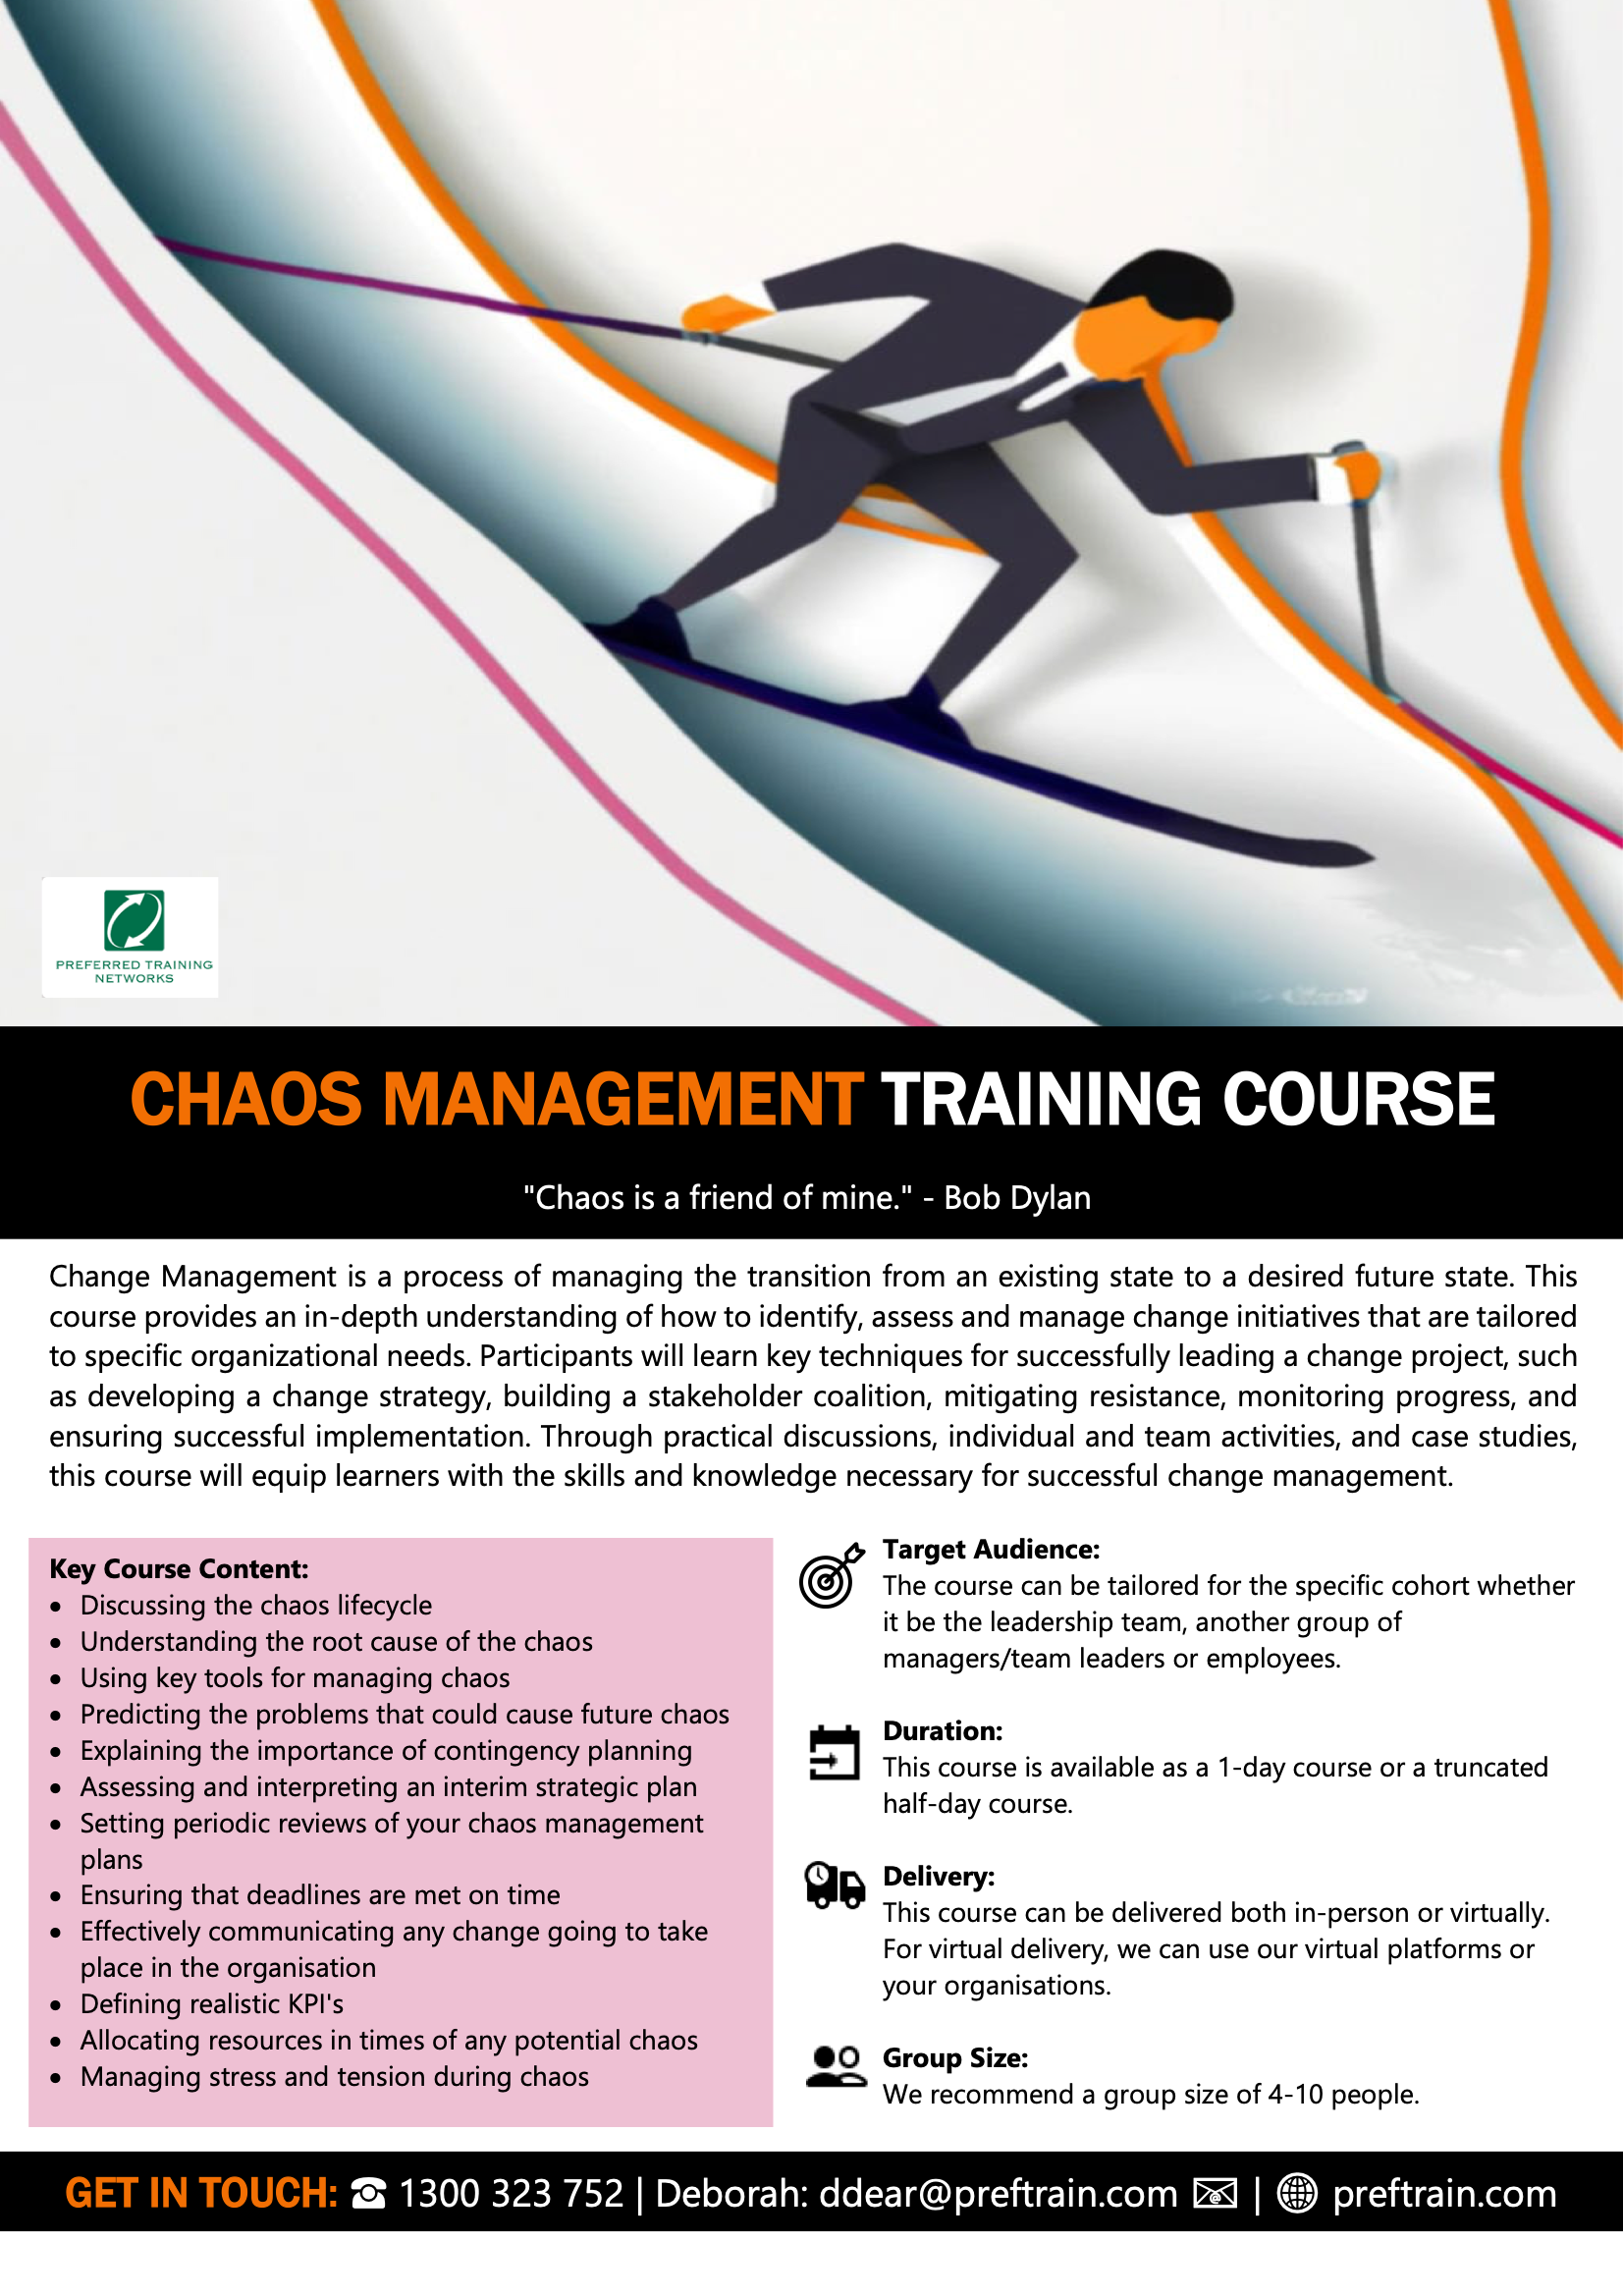 Chaos Management Training Course